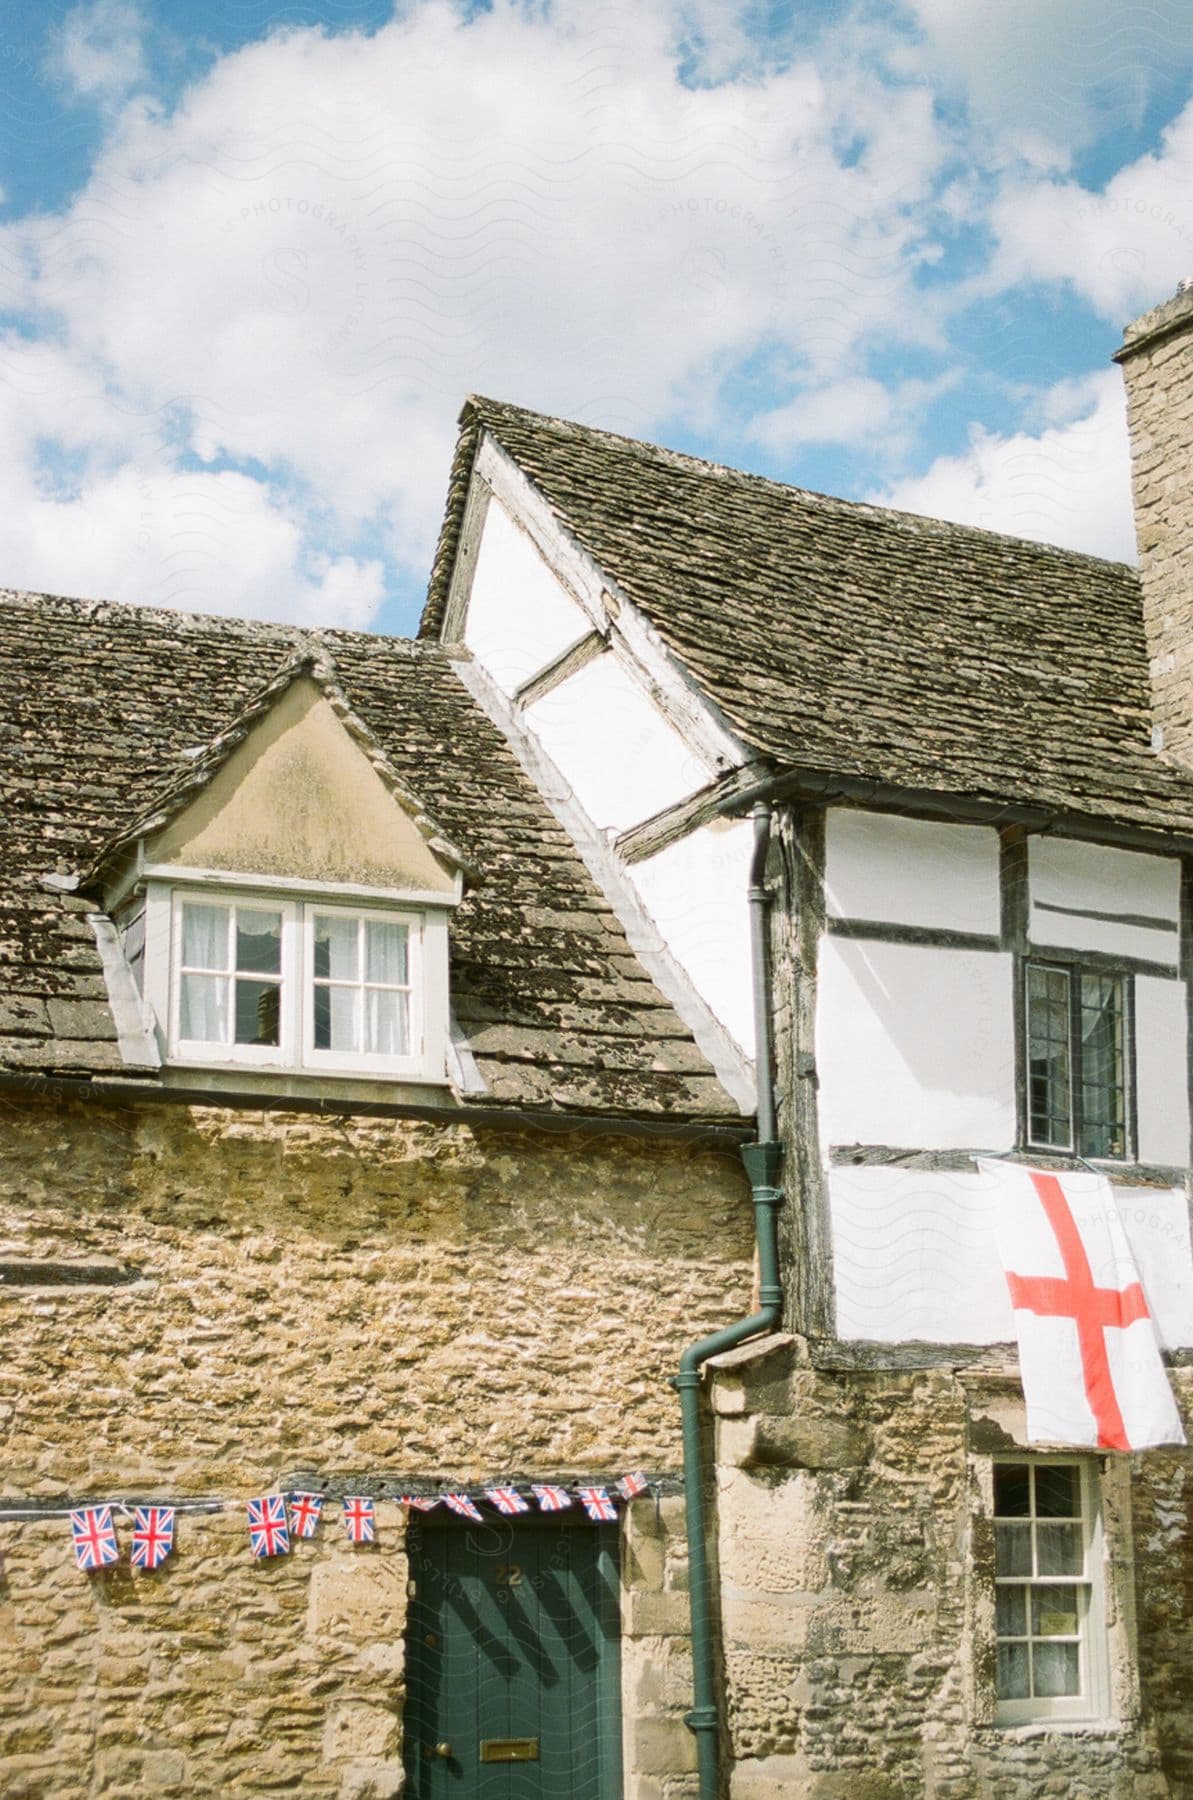 A charming stone house with a thatched roof, adorned with the English flag and small British flags.